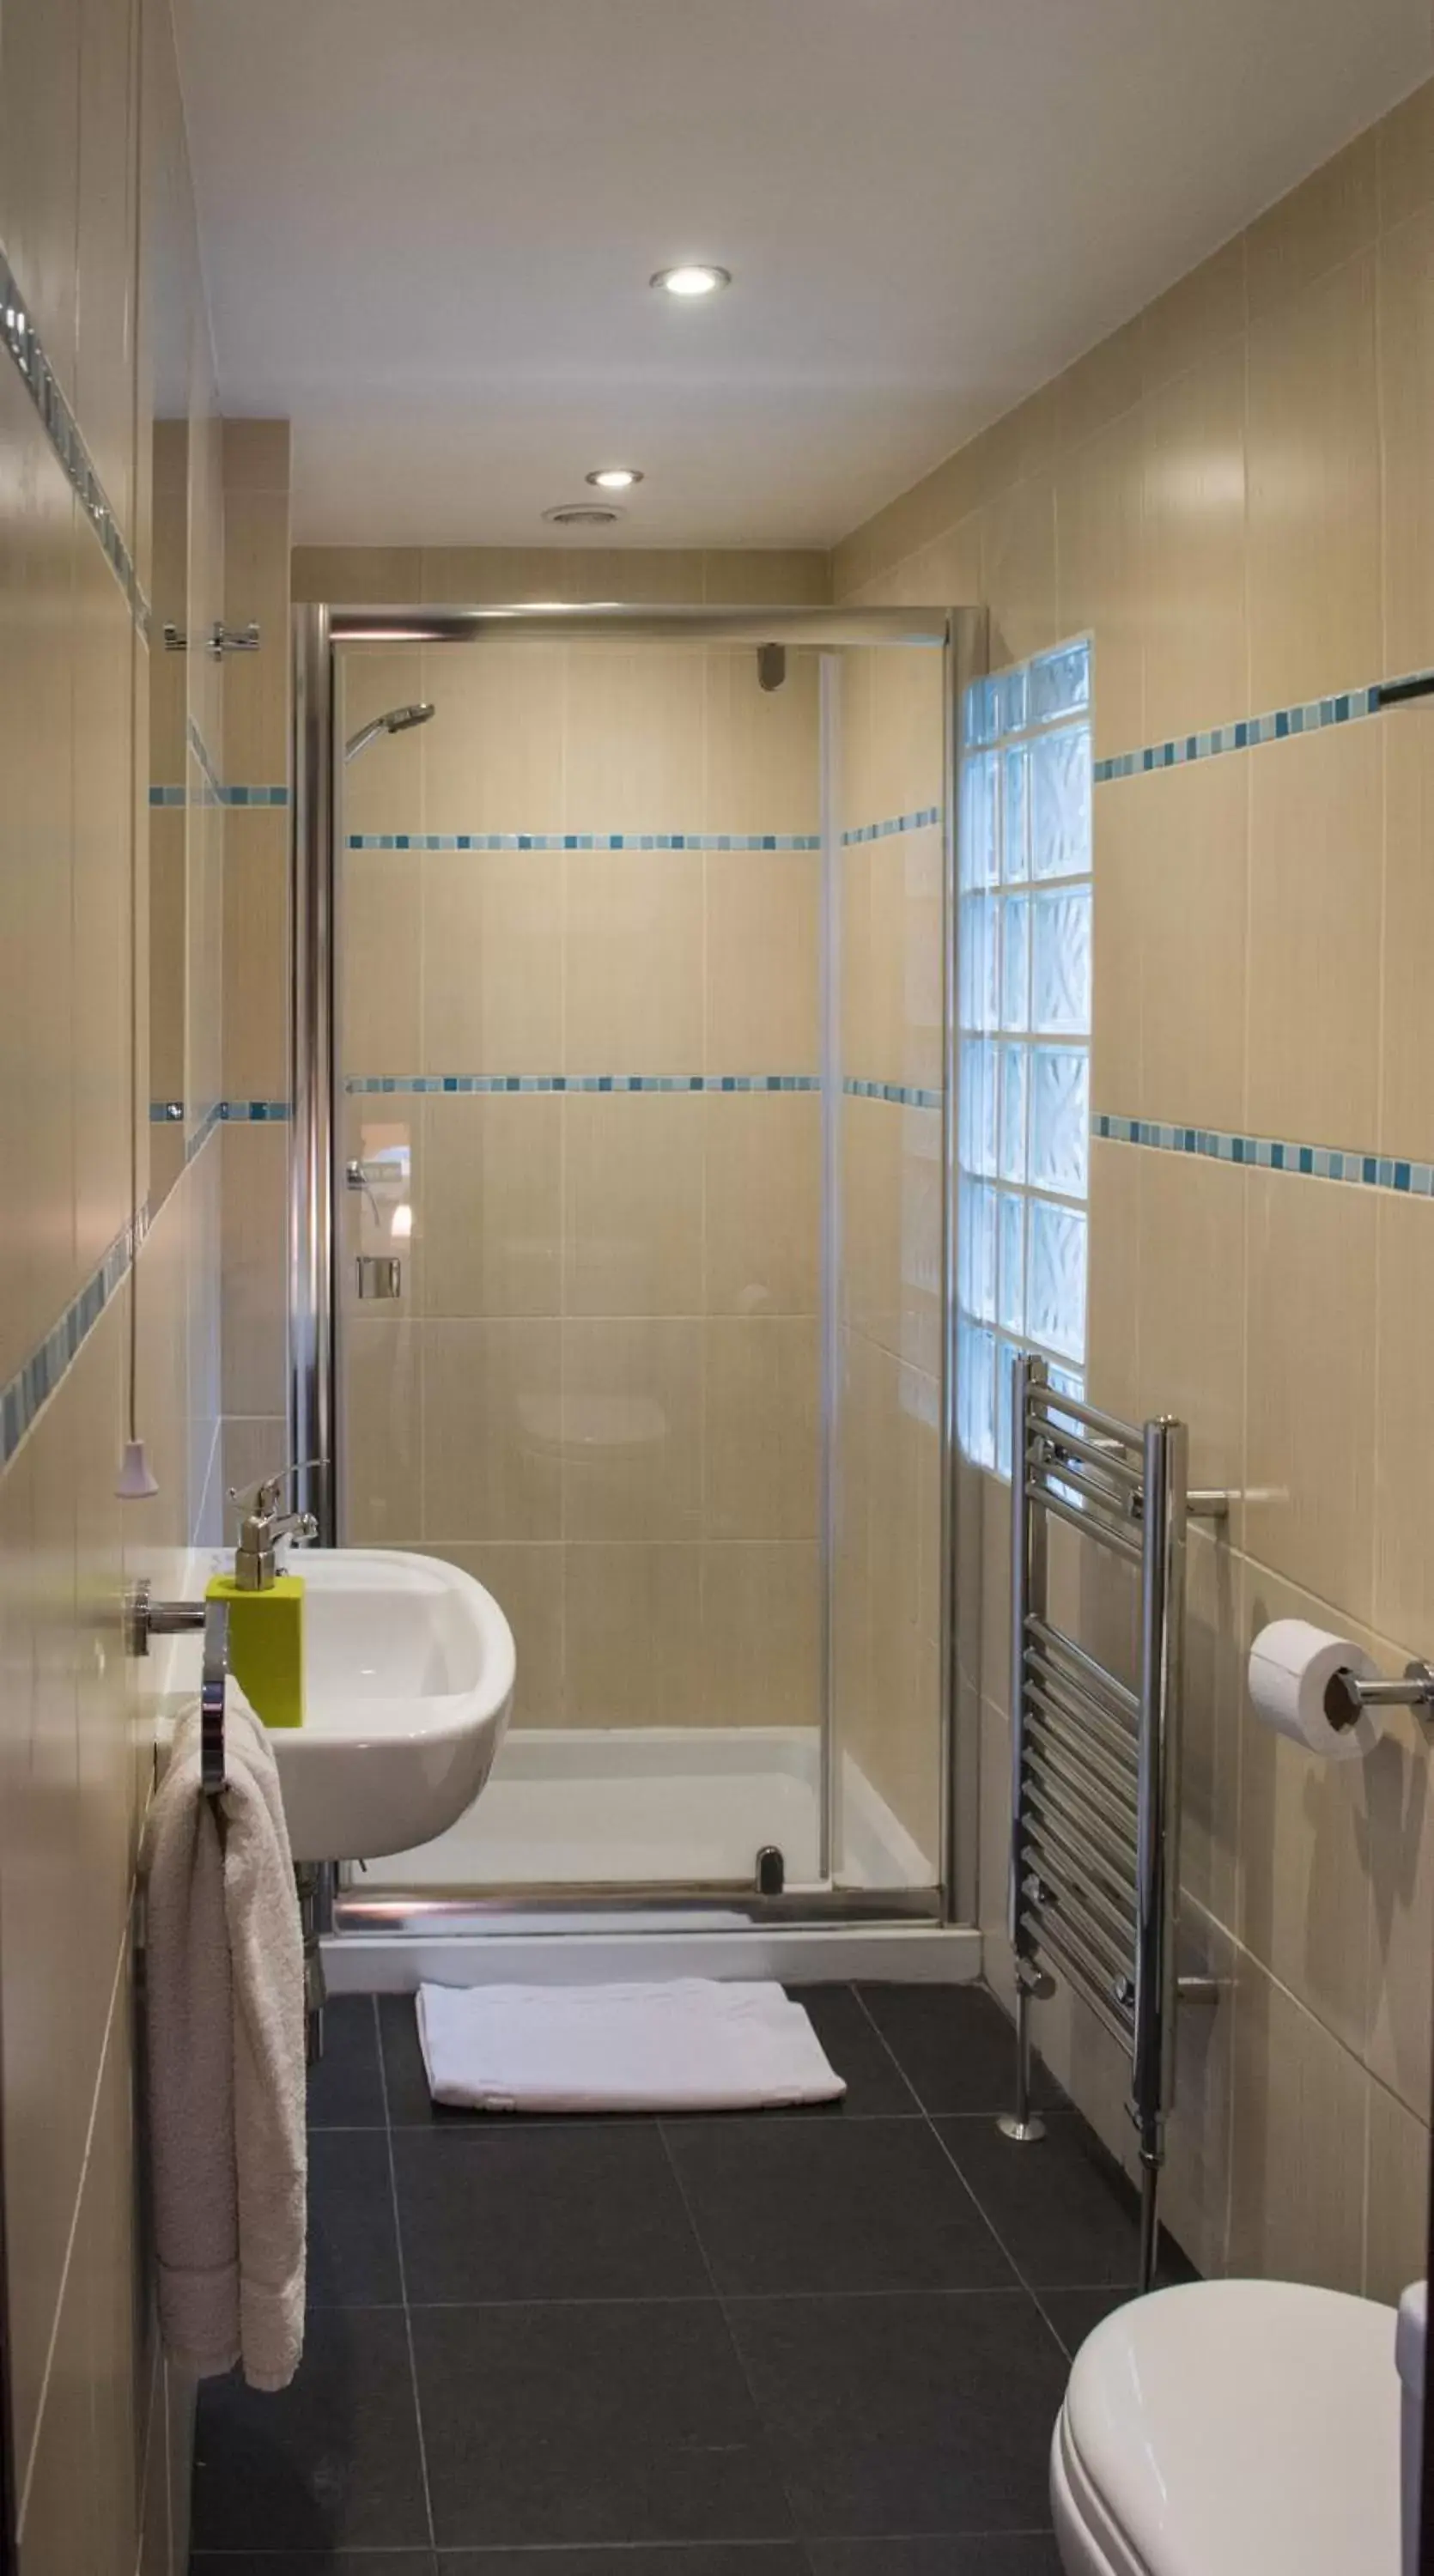 Area and facilities, Bathroom in St Athans Hotel